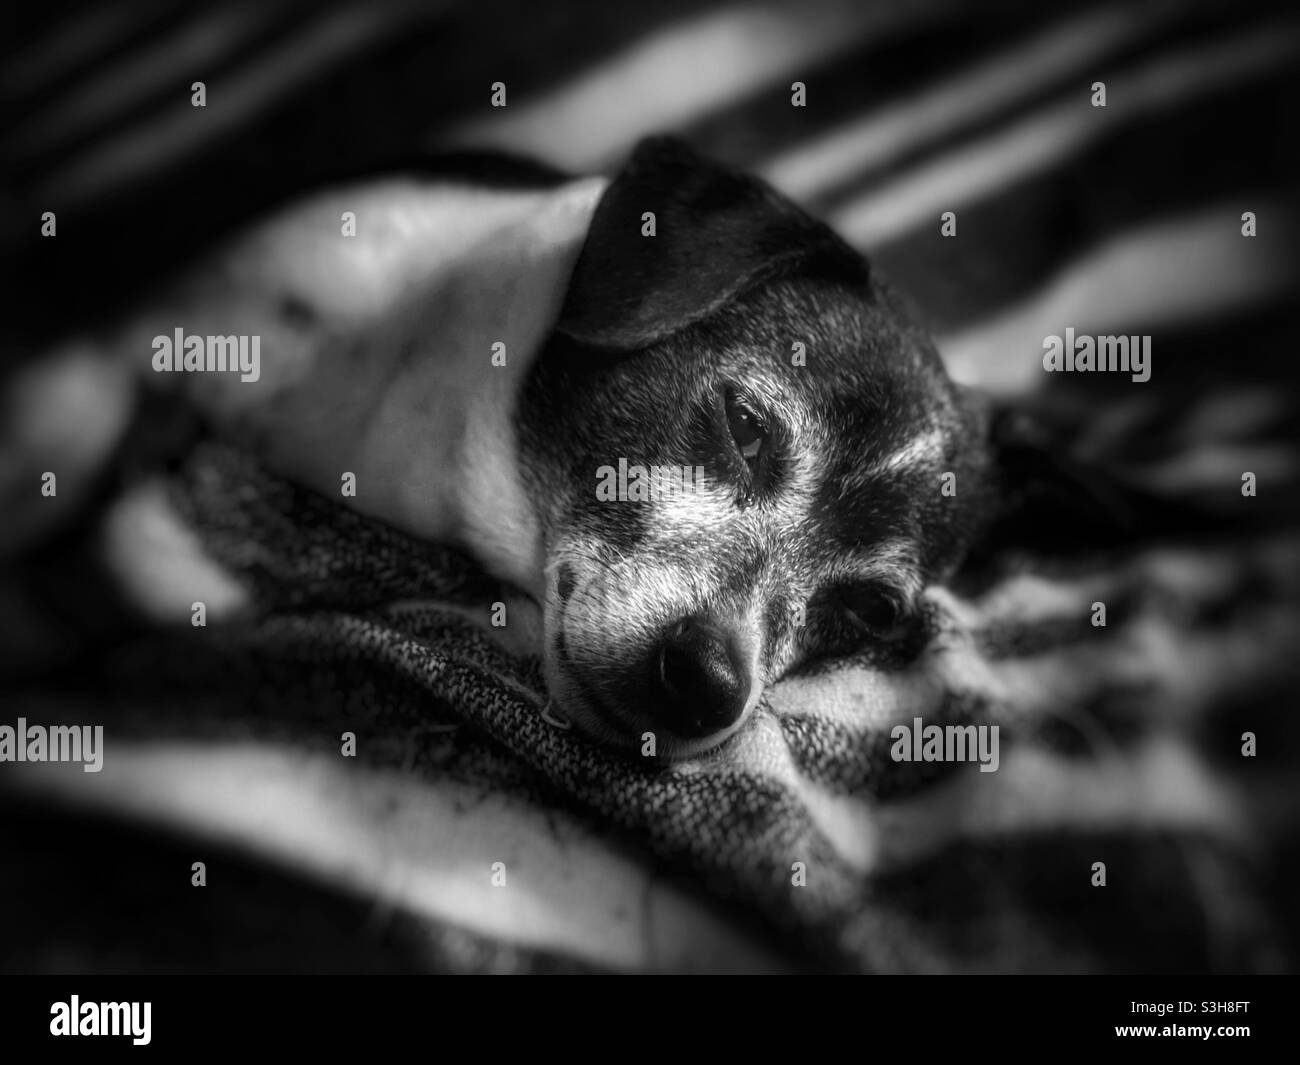 Older black and white dog laying on a black and white striped blanket Stock Photo